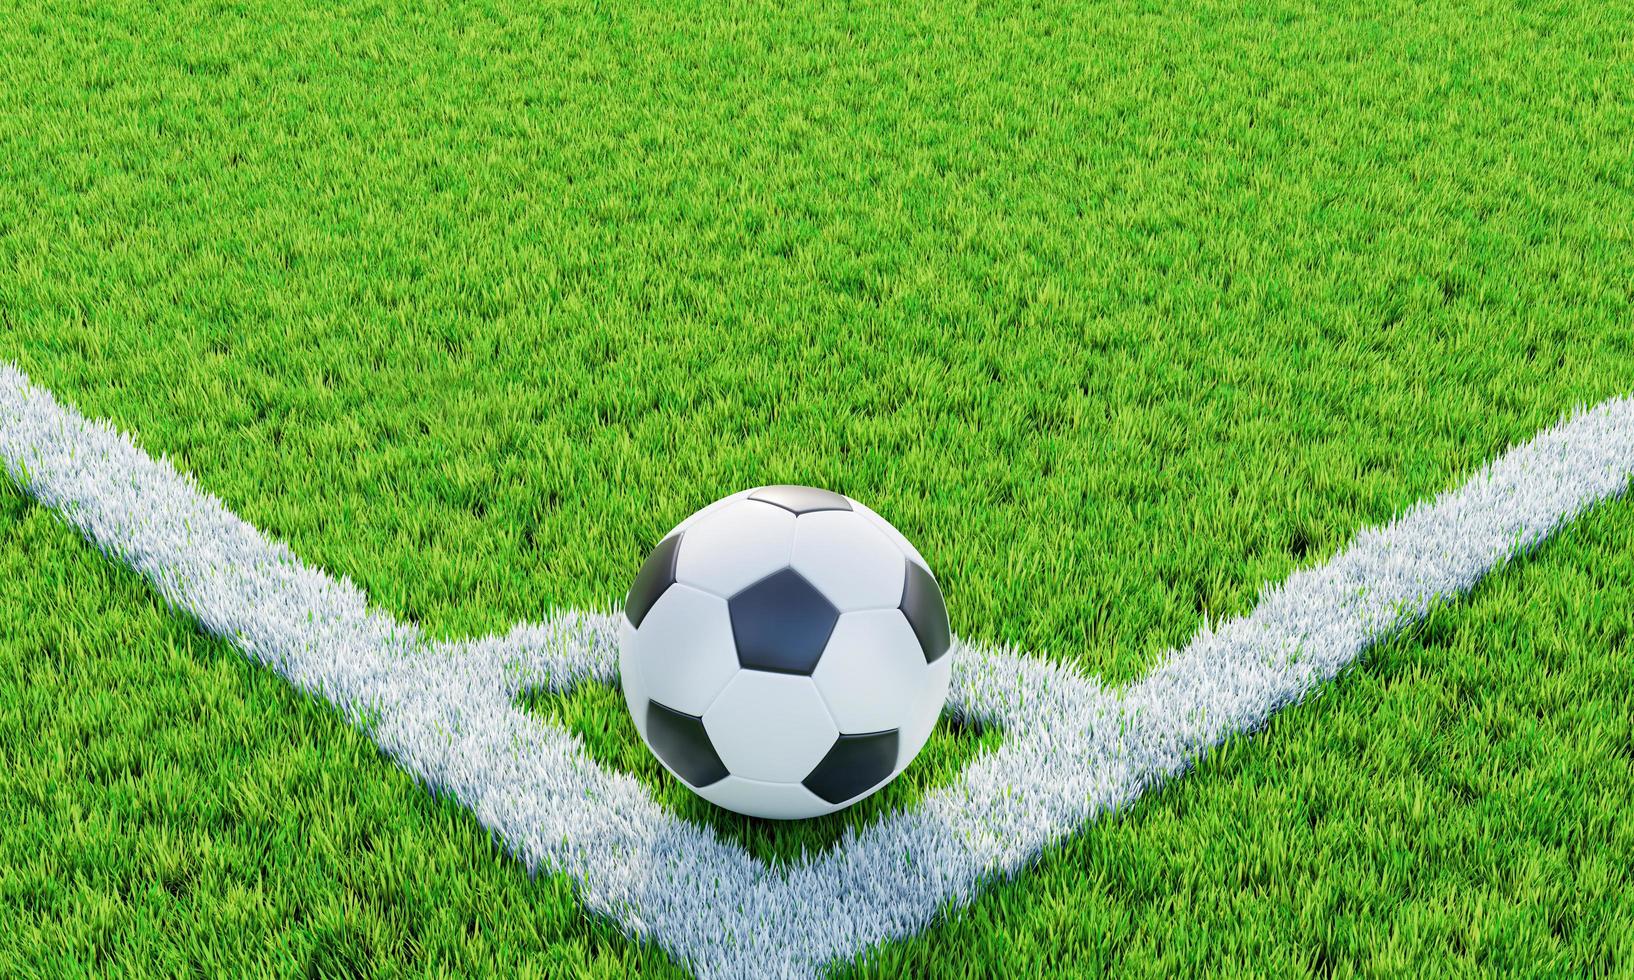 Lawn or soccer field with thick, soft green grass. A standard patterned soccer ball placed for corner kicks. Top view Football field. Background or Wallpaper. 3D lawn. 3D Rendering. photo